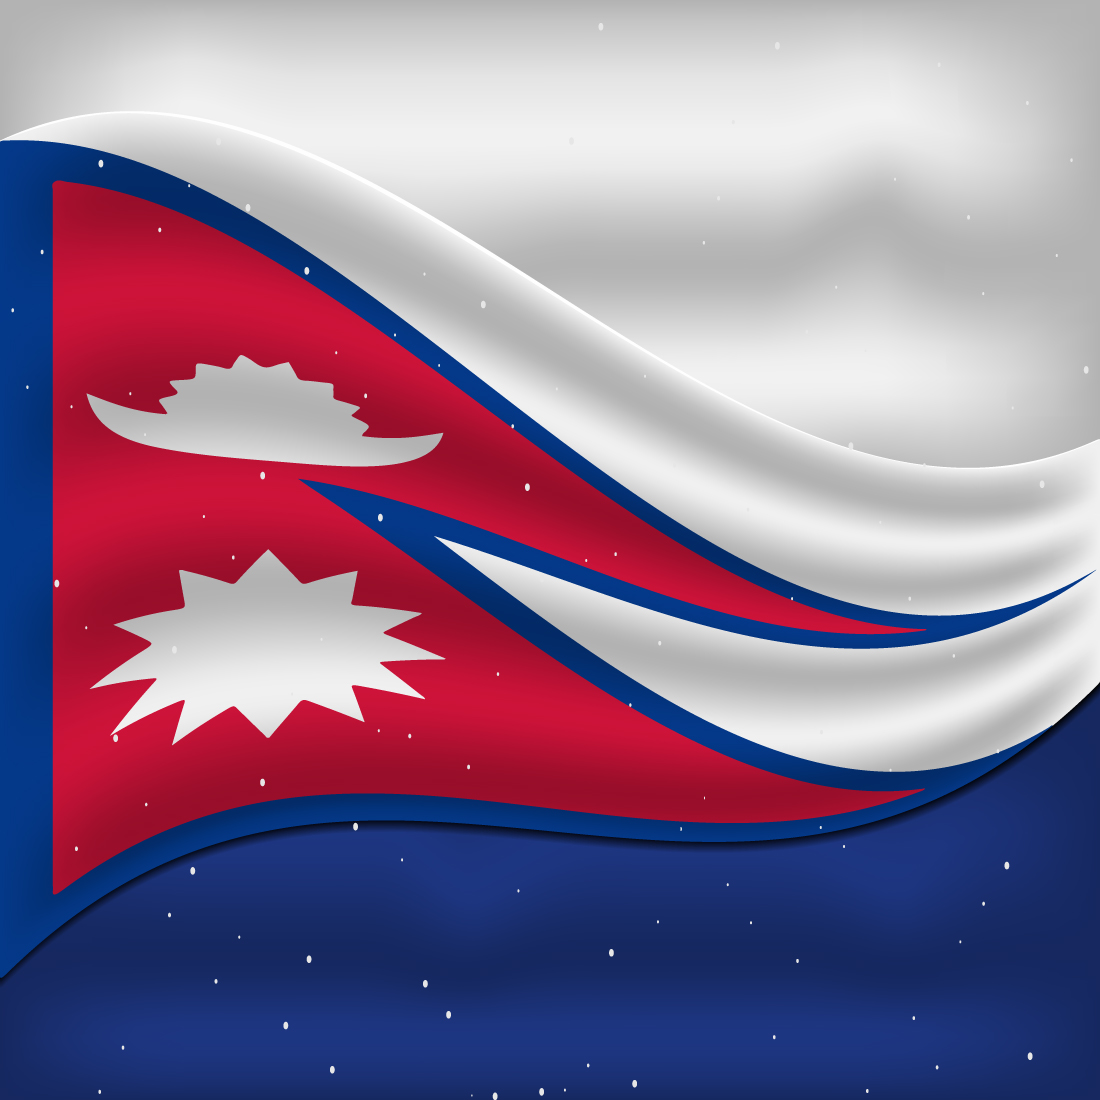 Irresistible image of the flag of Nepal.